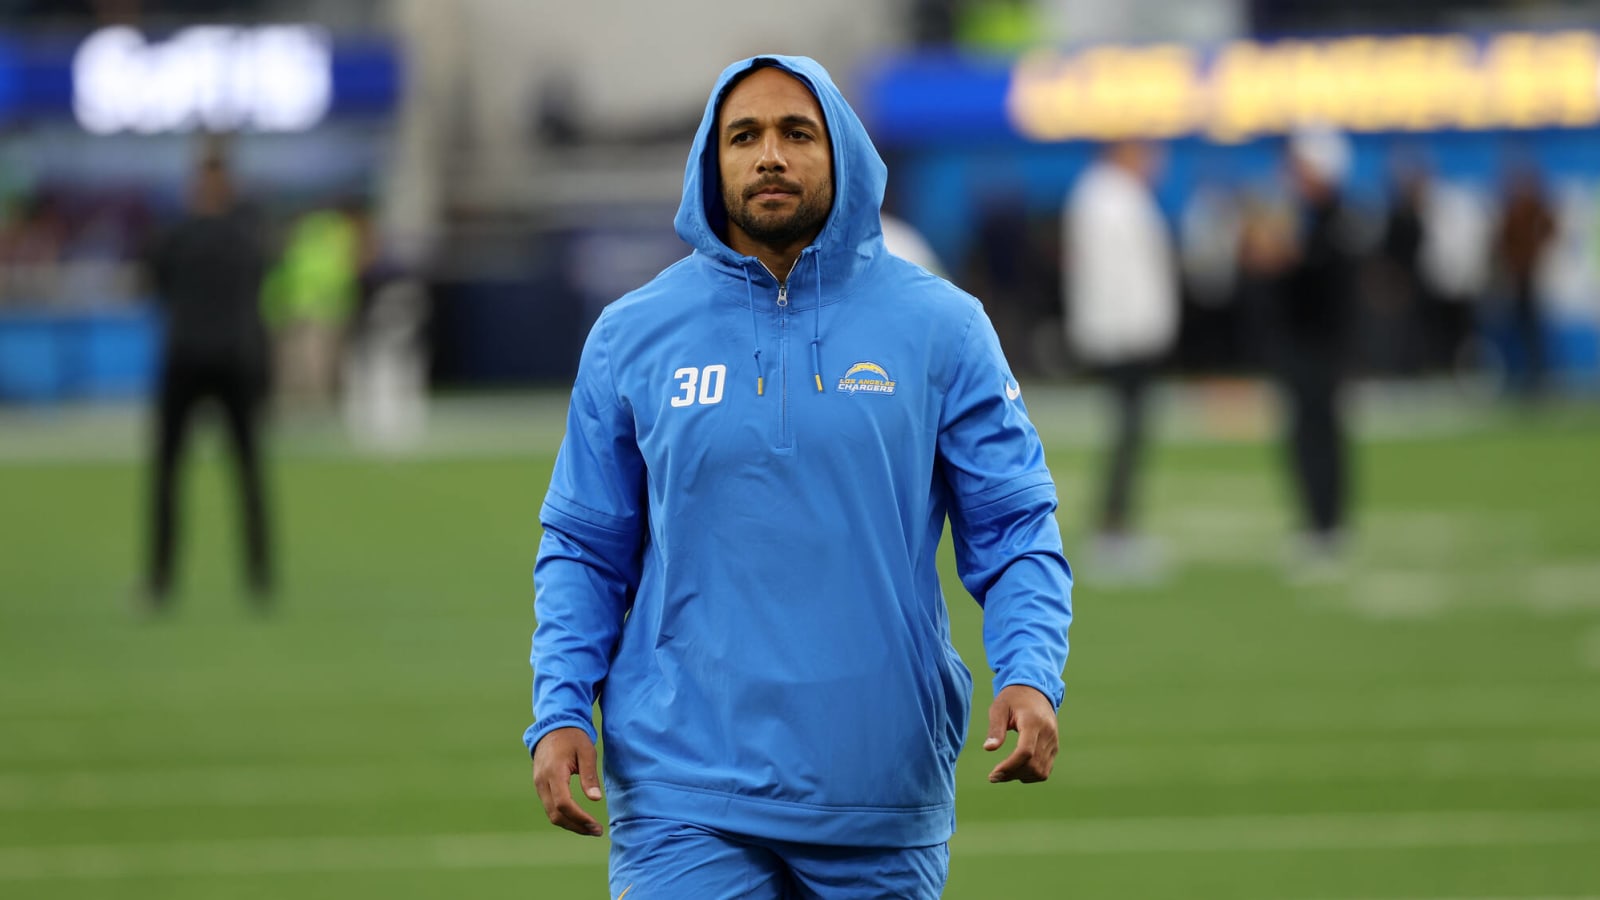 Chargers reducing Austin Ekeler's role?